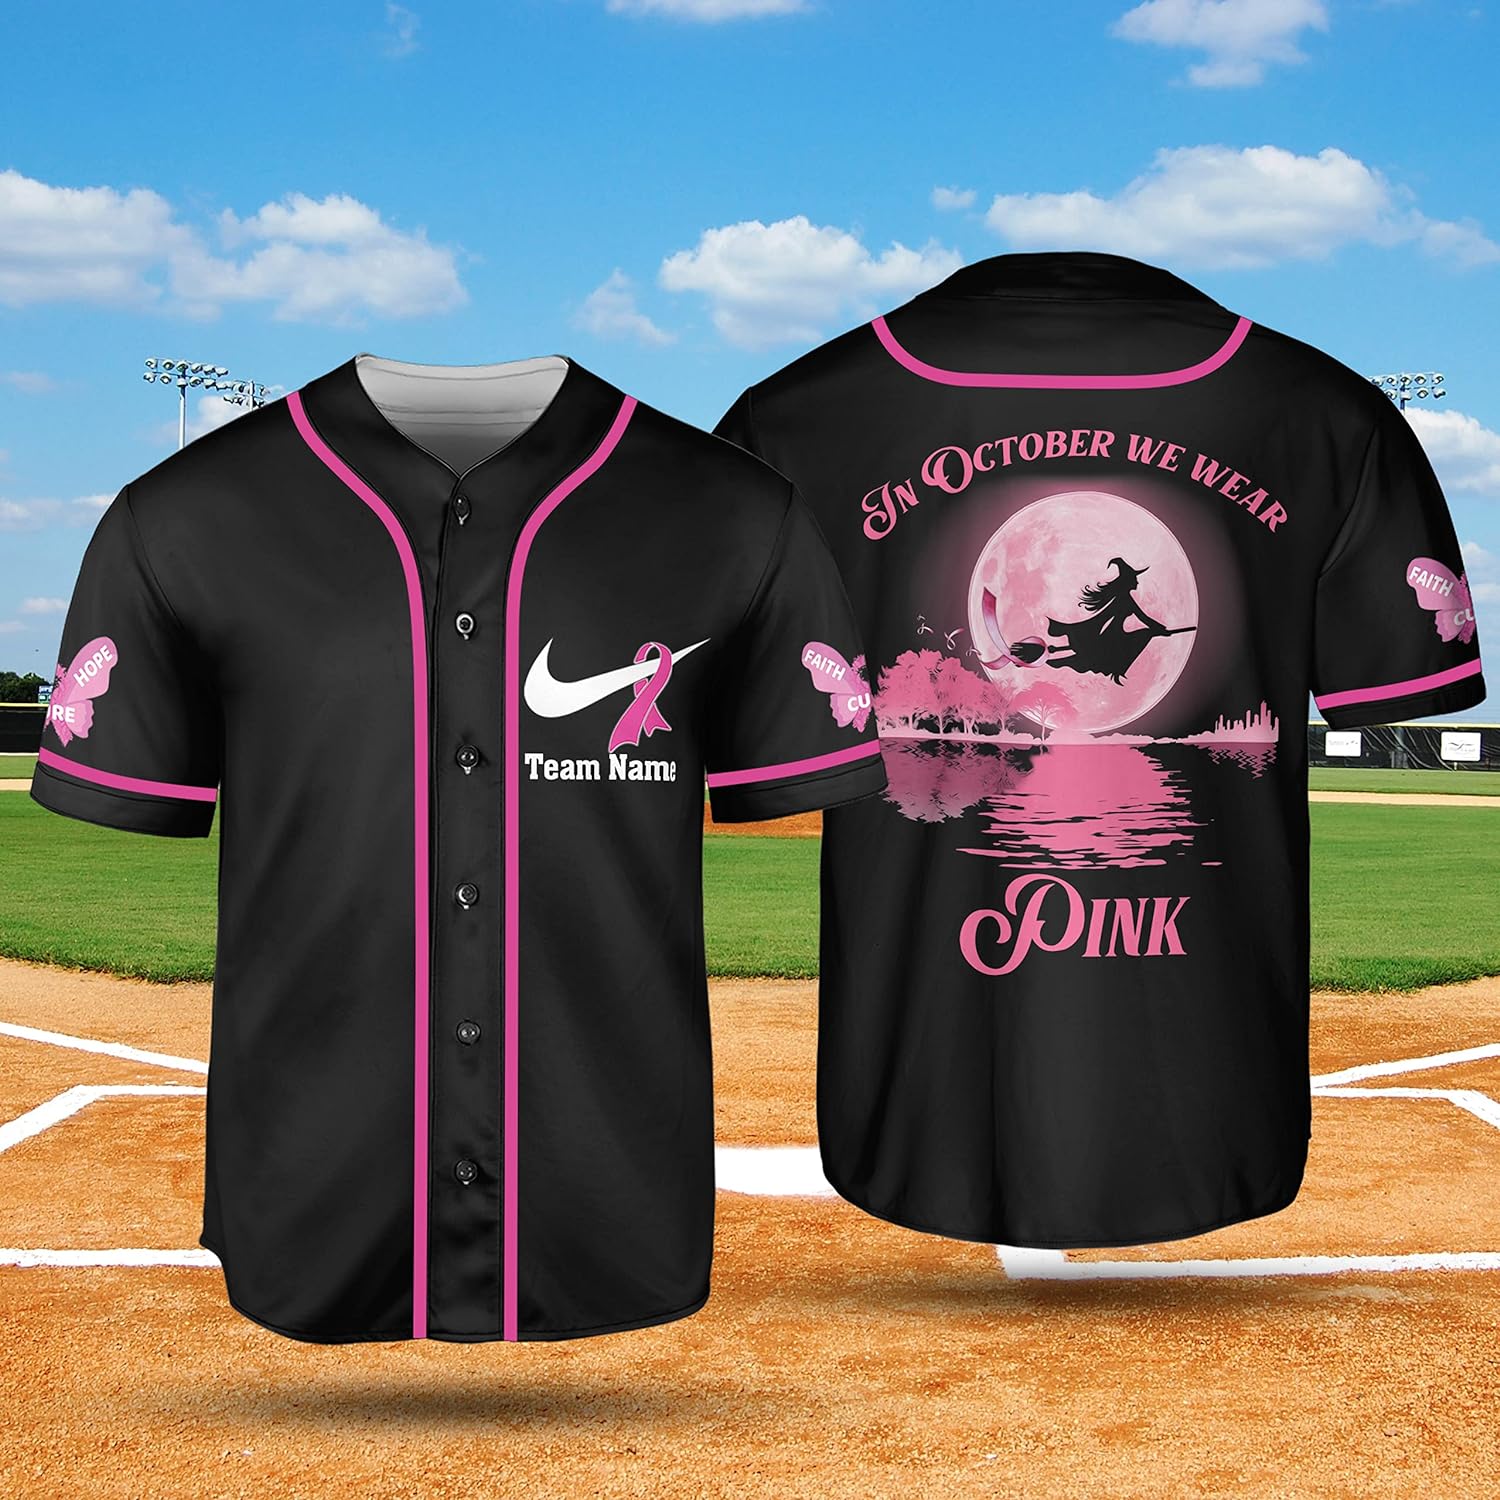 In October We Wear Pink Jersey Shirt/ Breast Cancer Month Jersey Shirt/ Halloween Breast Cancer Shirt